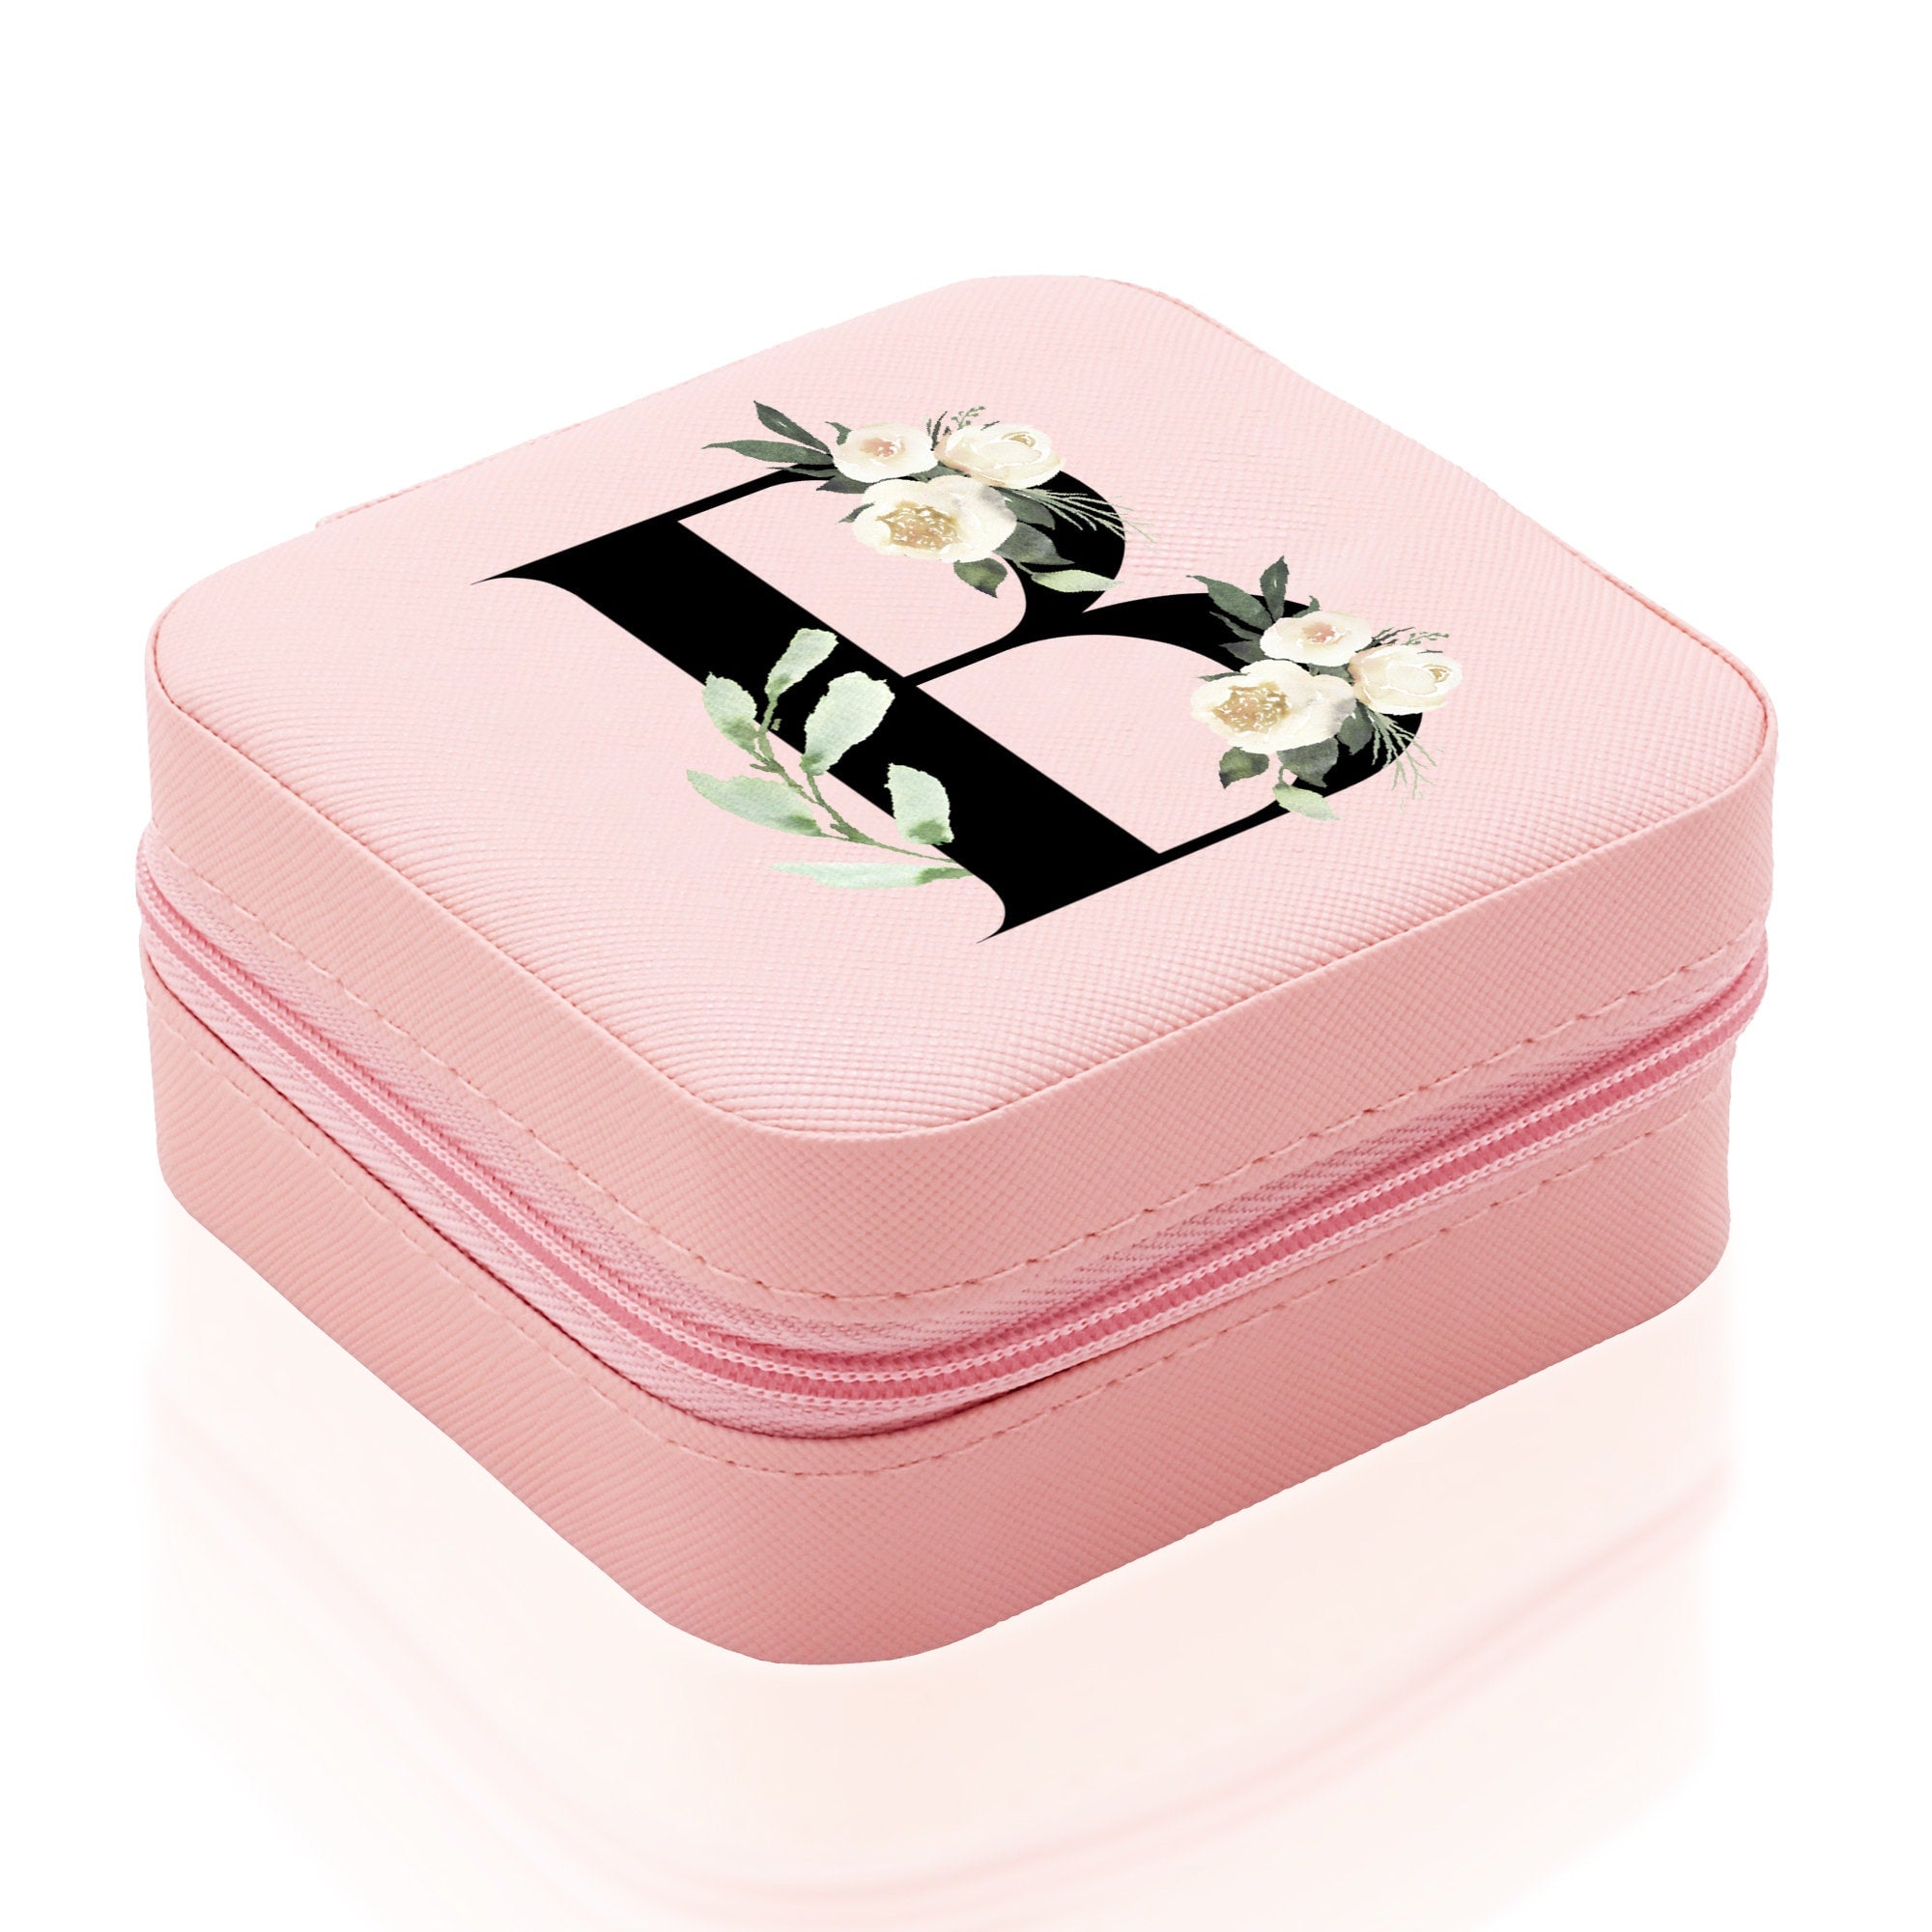 a pink case with flowers on it on a white background